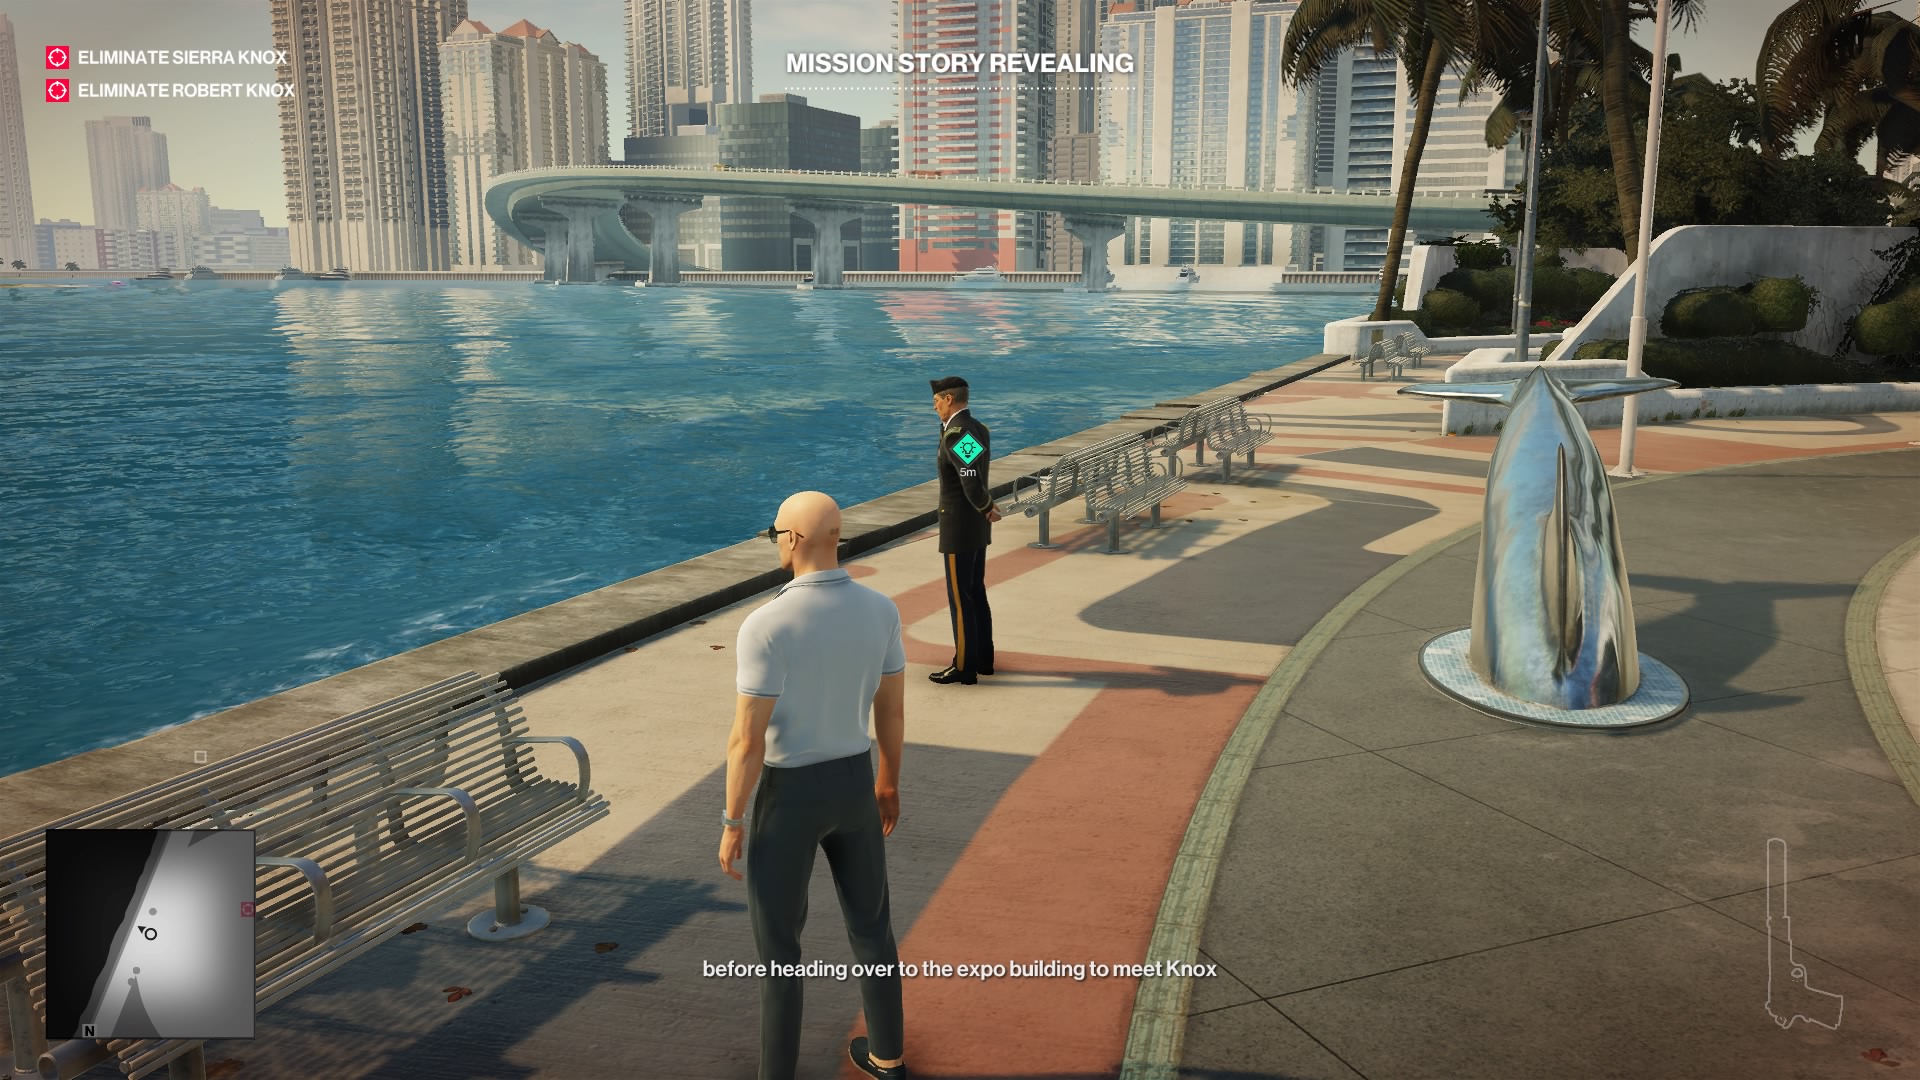 android hitman 2 images